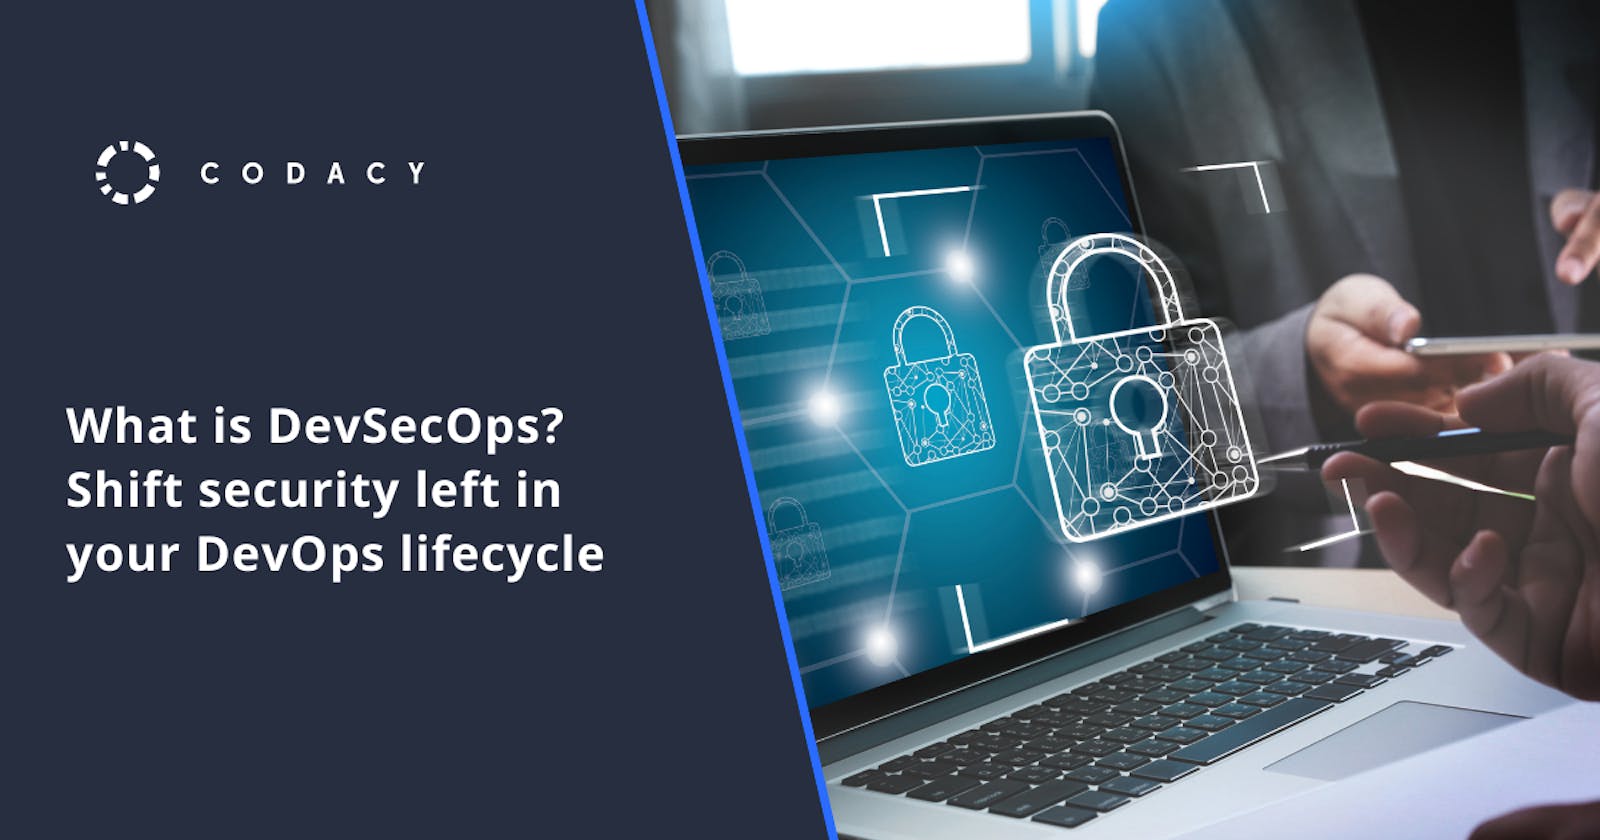 What is DevSecOps? Shift security left in your DevOps lifecycle